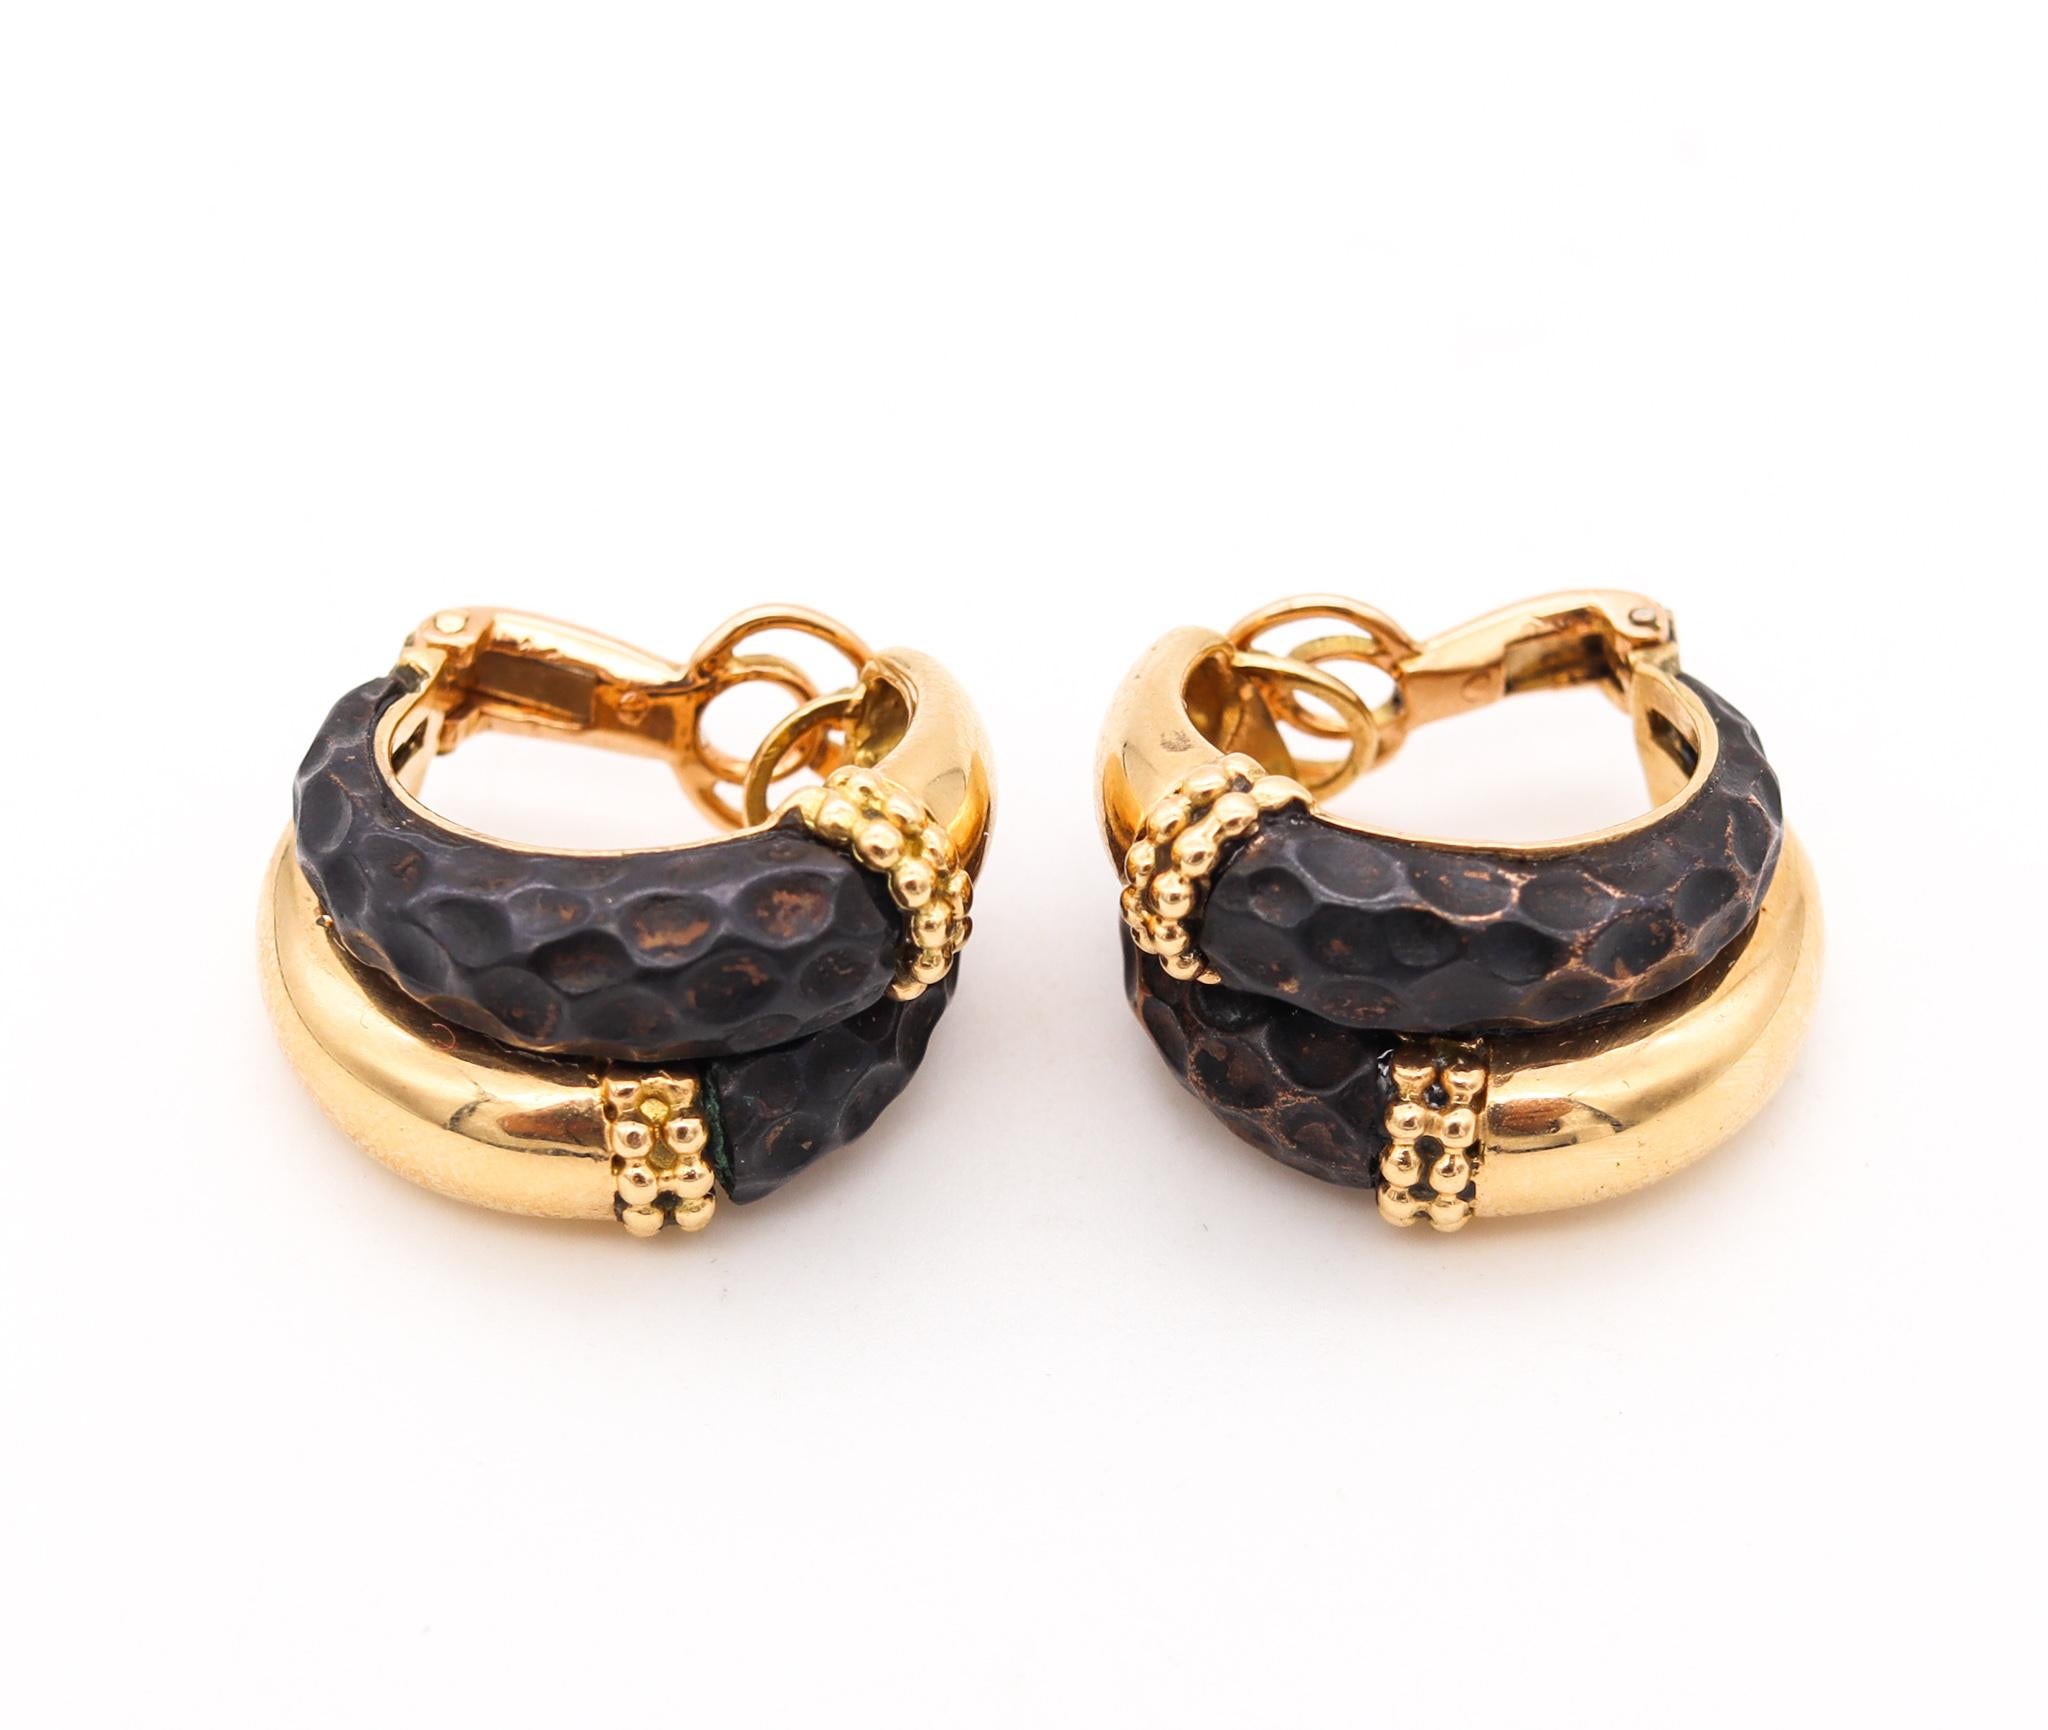 Boucheron 1970 Paris Modernism Clip Earrings In 18Kt Gold with Patinated Airain 3